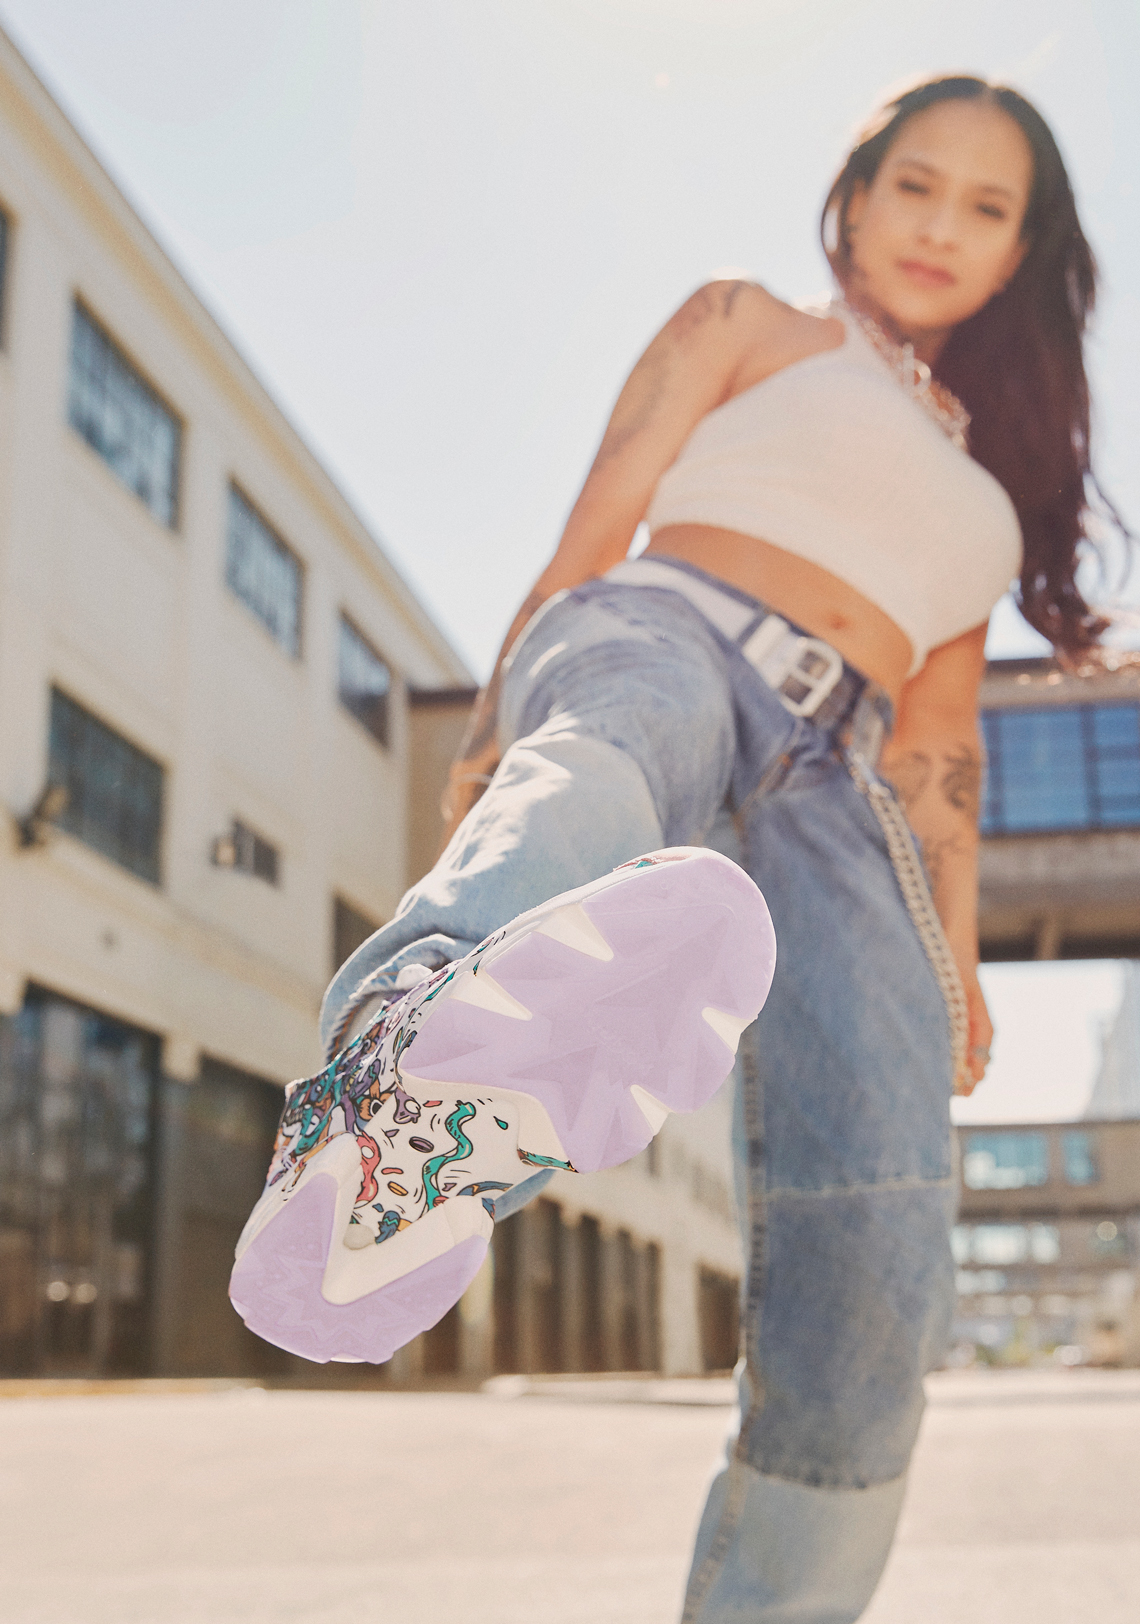 Continuing on with the Reebok Distortedd Fu7743 4